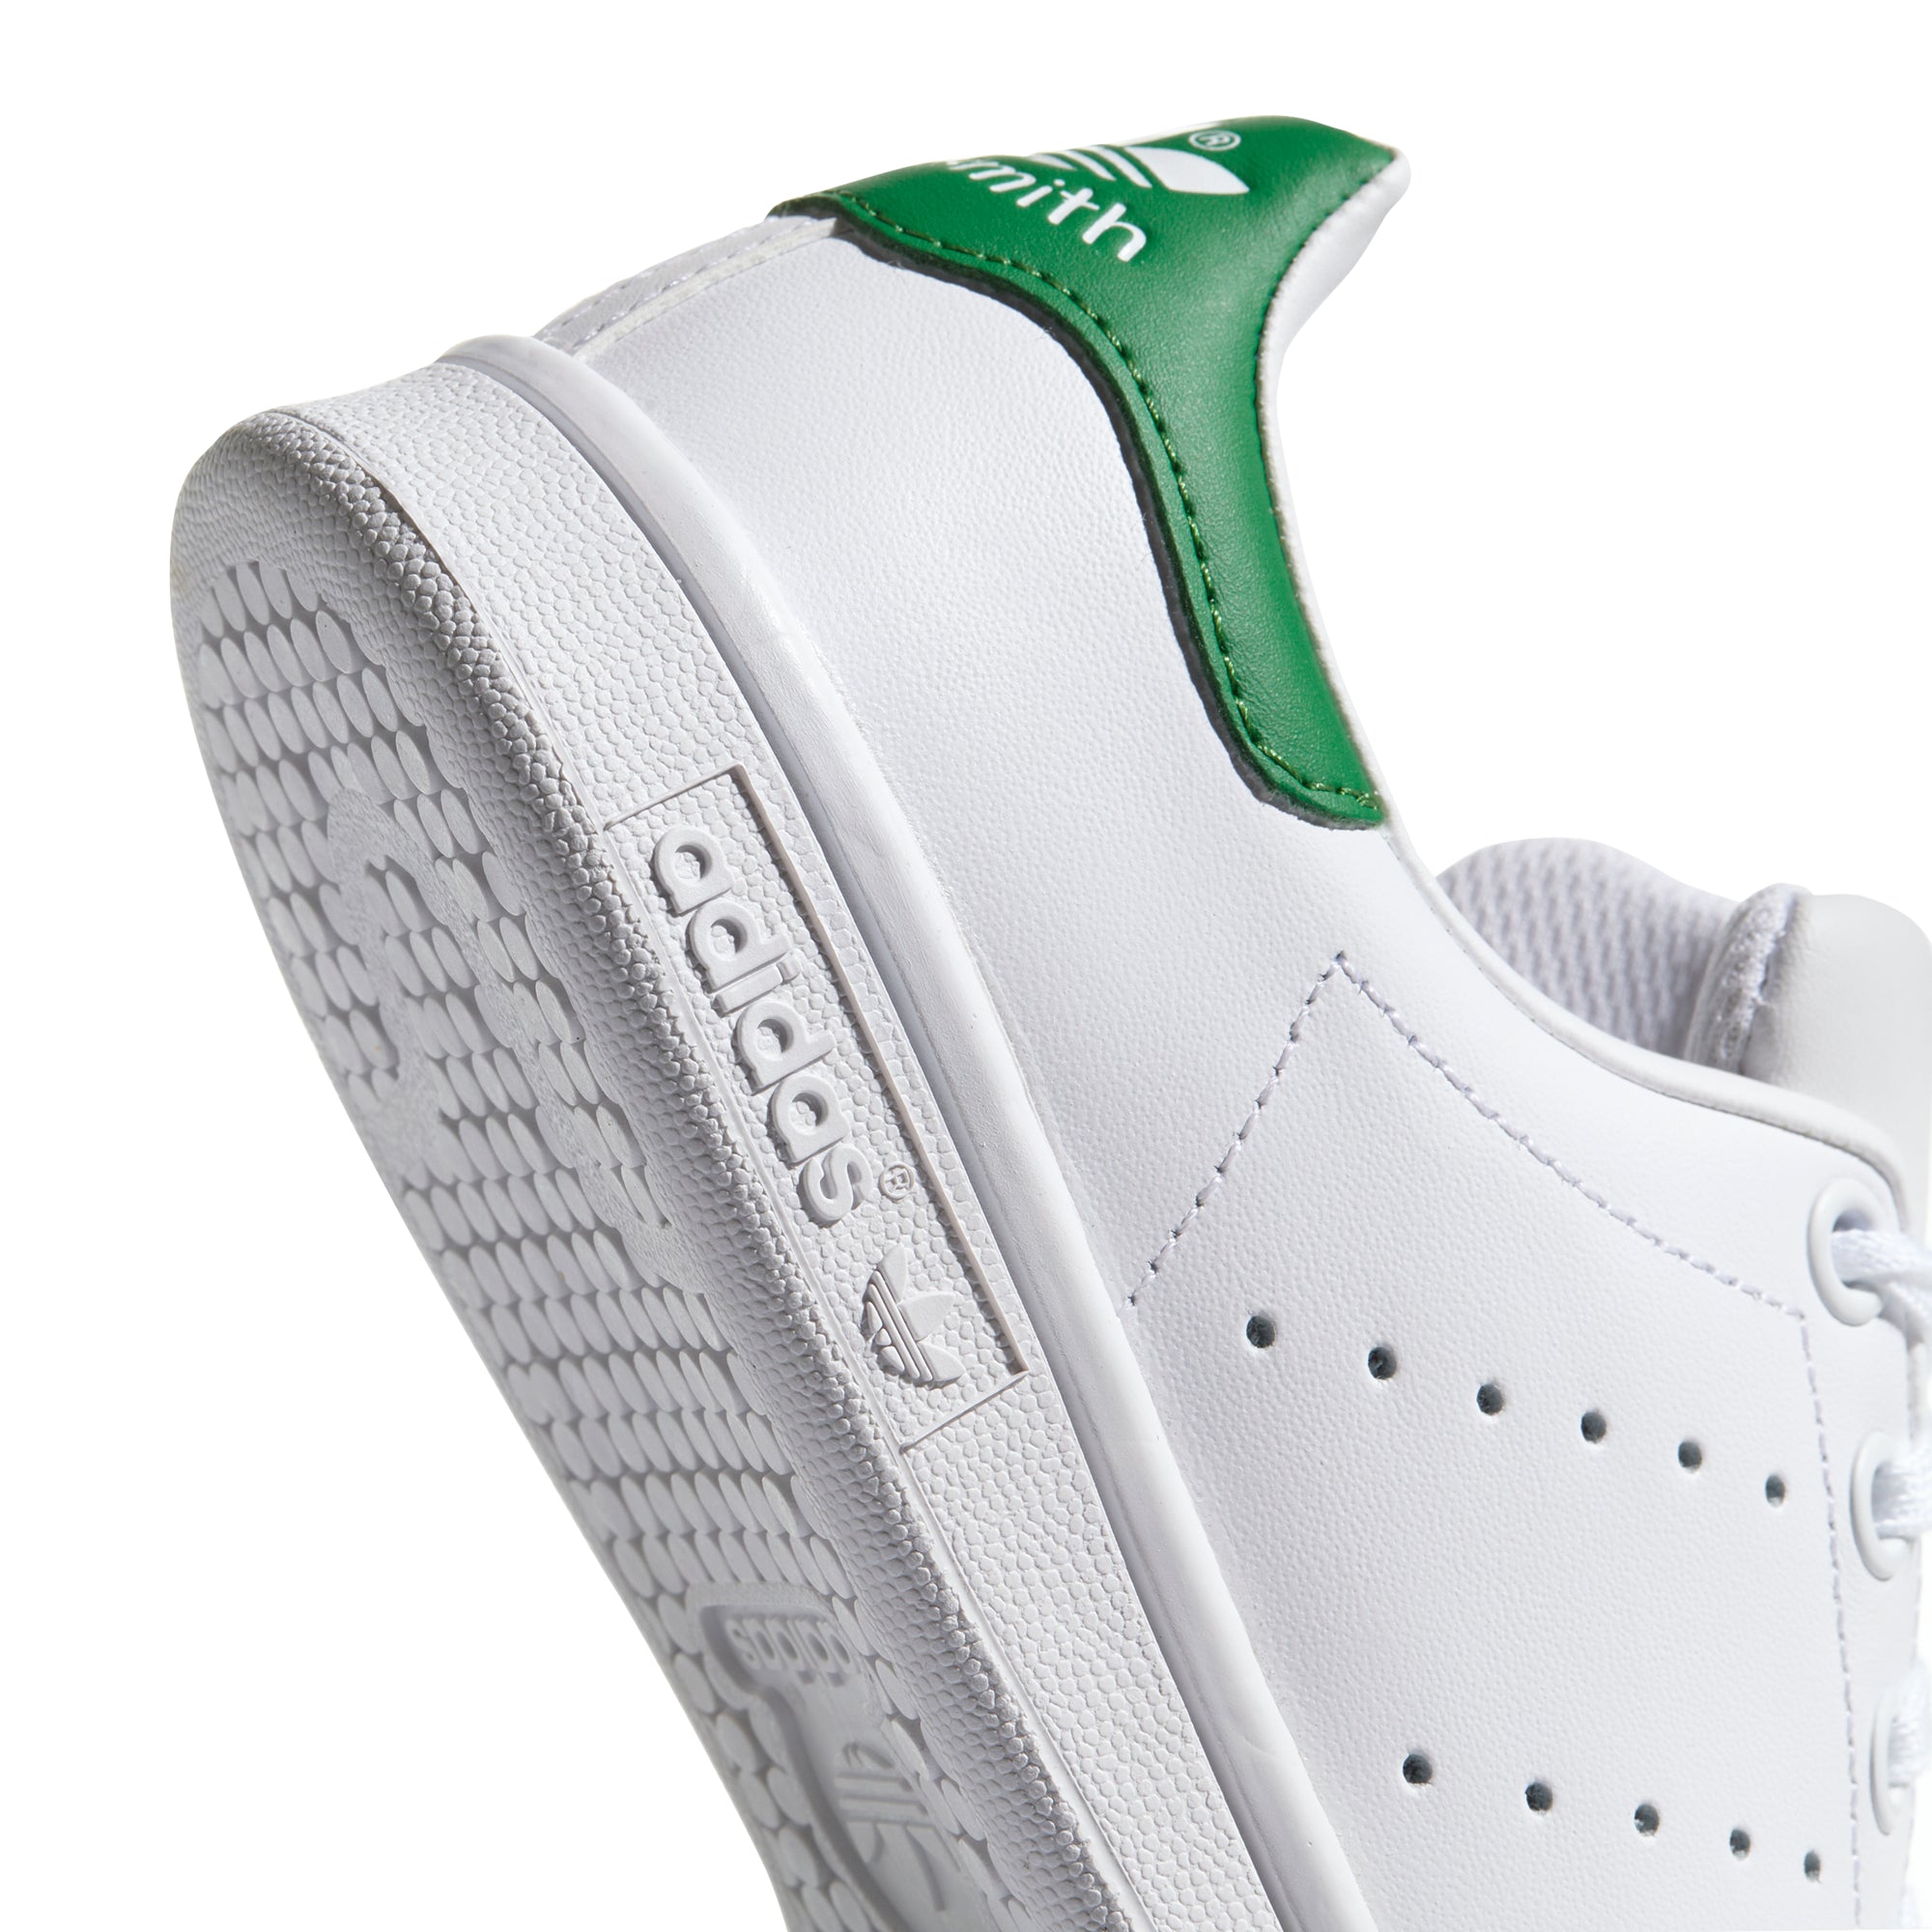 Adidas Stan Smith vert, Sneakers Homme, Adidas